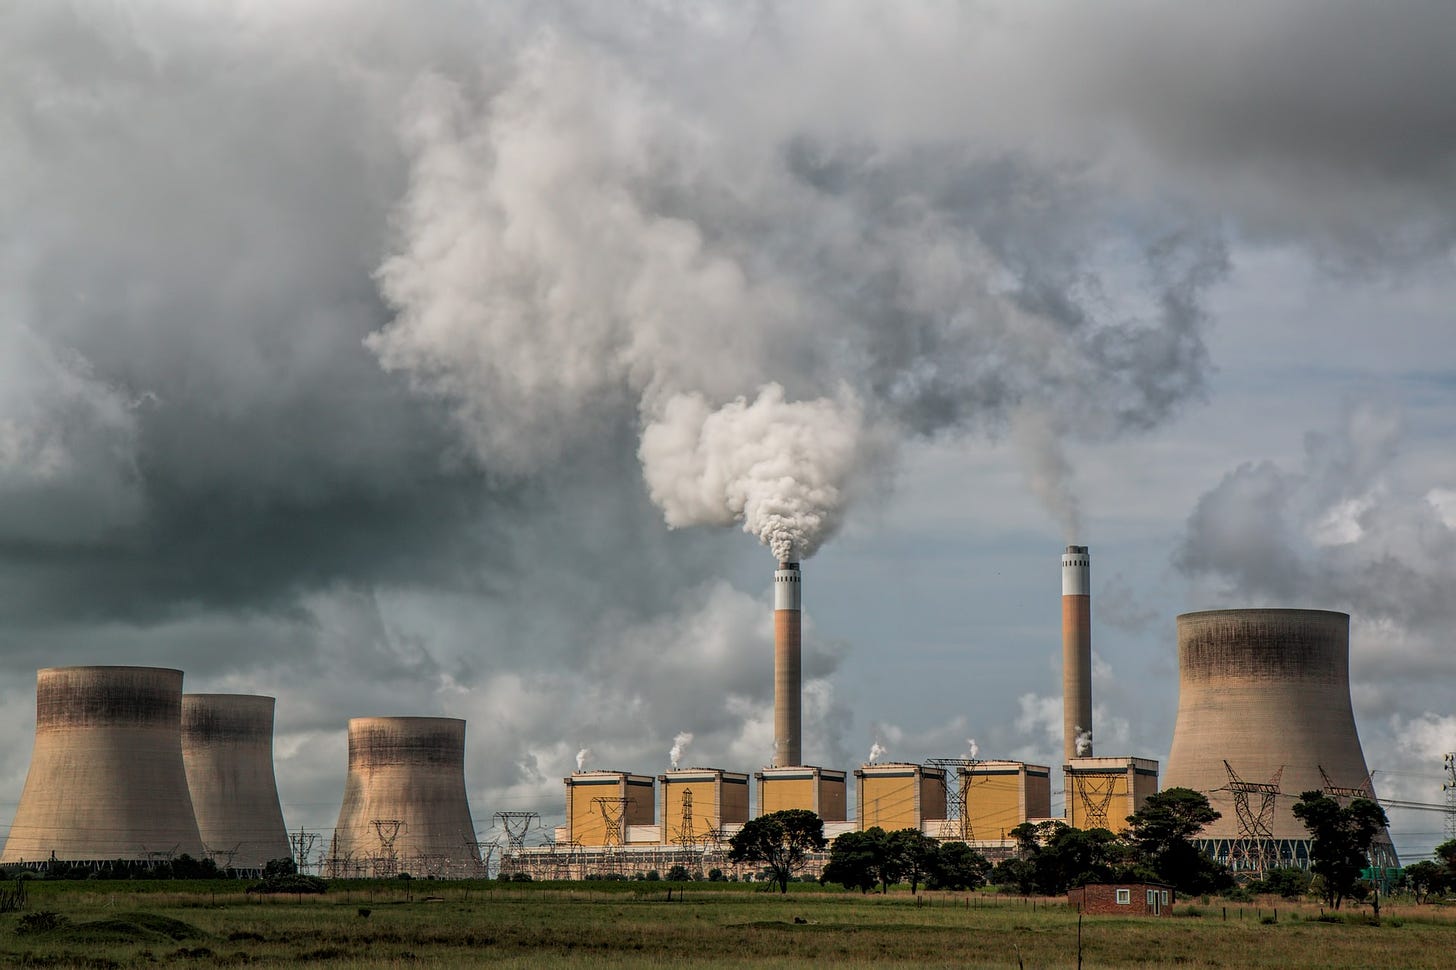 Photo of a power station with a chimney sending grey smoke into the sky